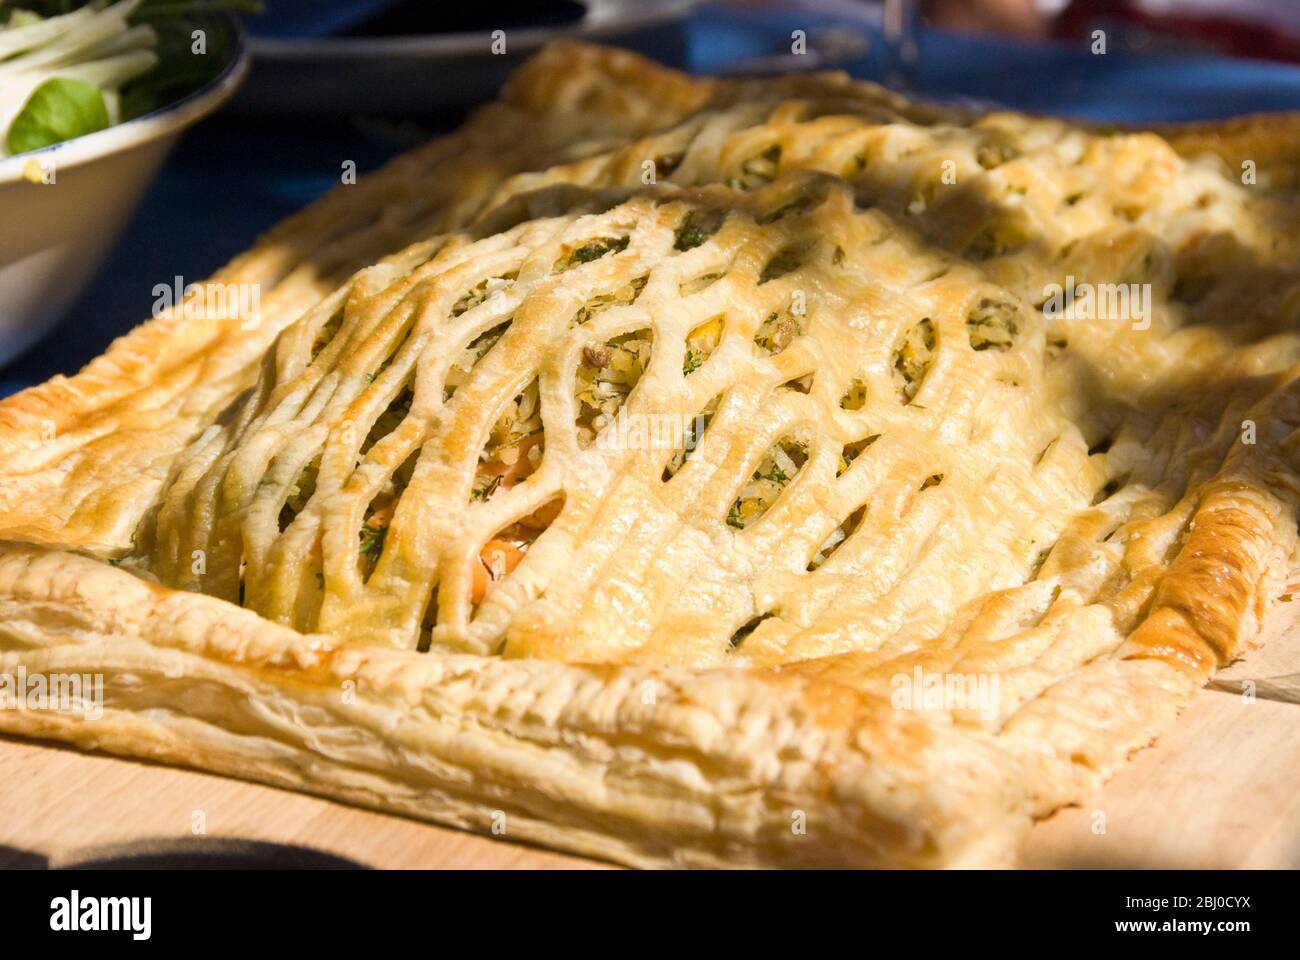 Salmon koulibiac - slamon fillets and rice in puff pastry case - a traditional russian dish - Stock Photo